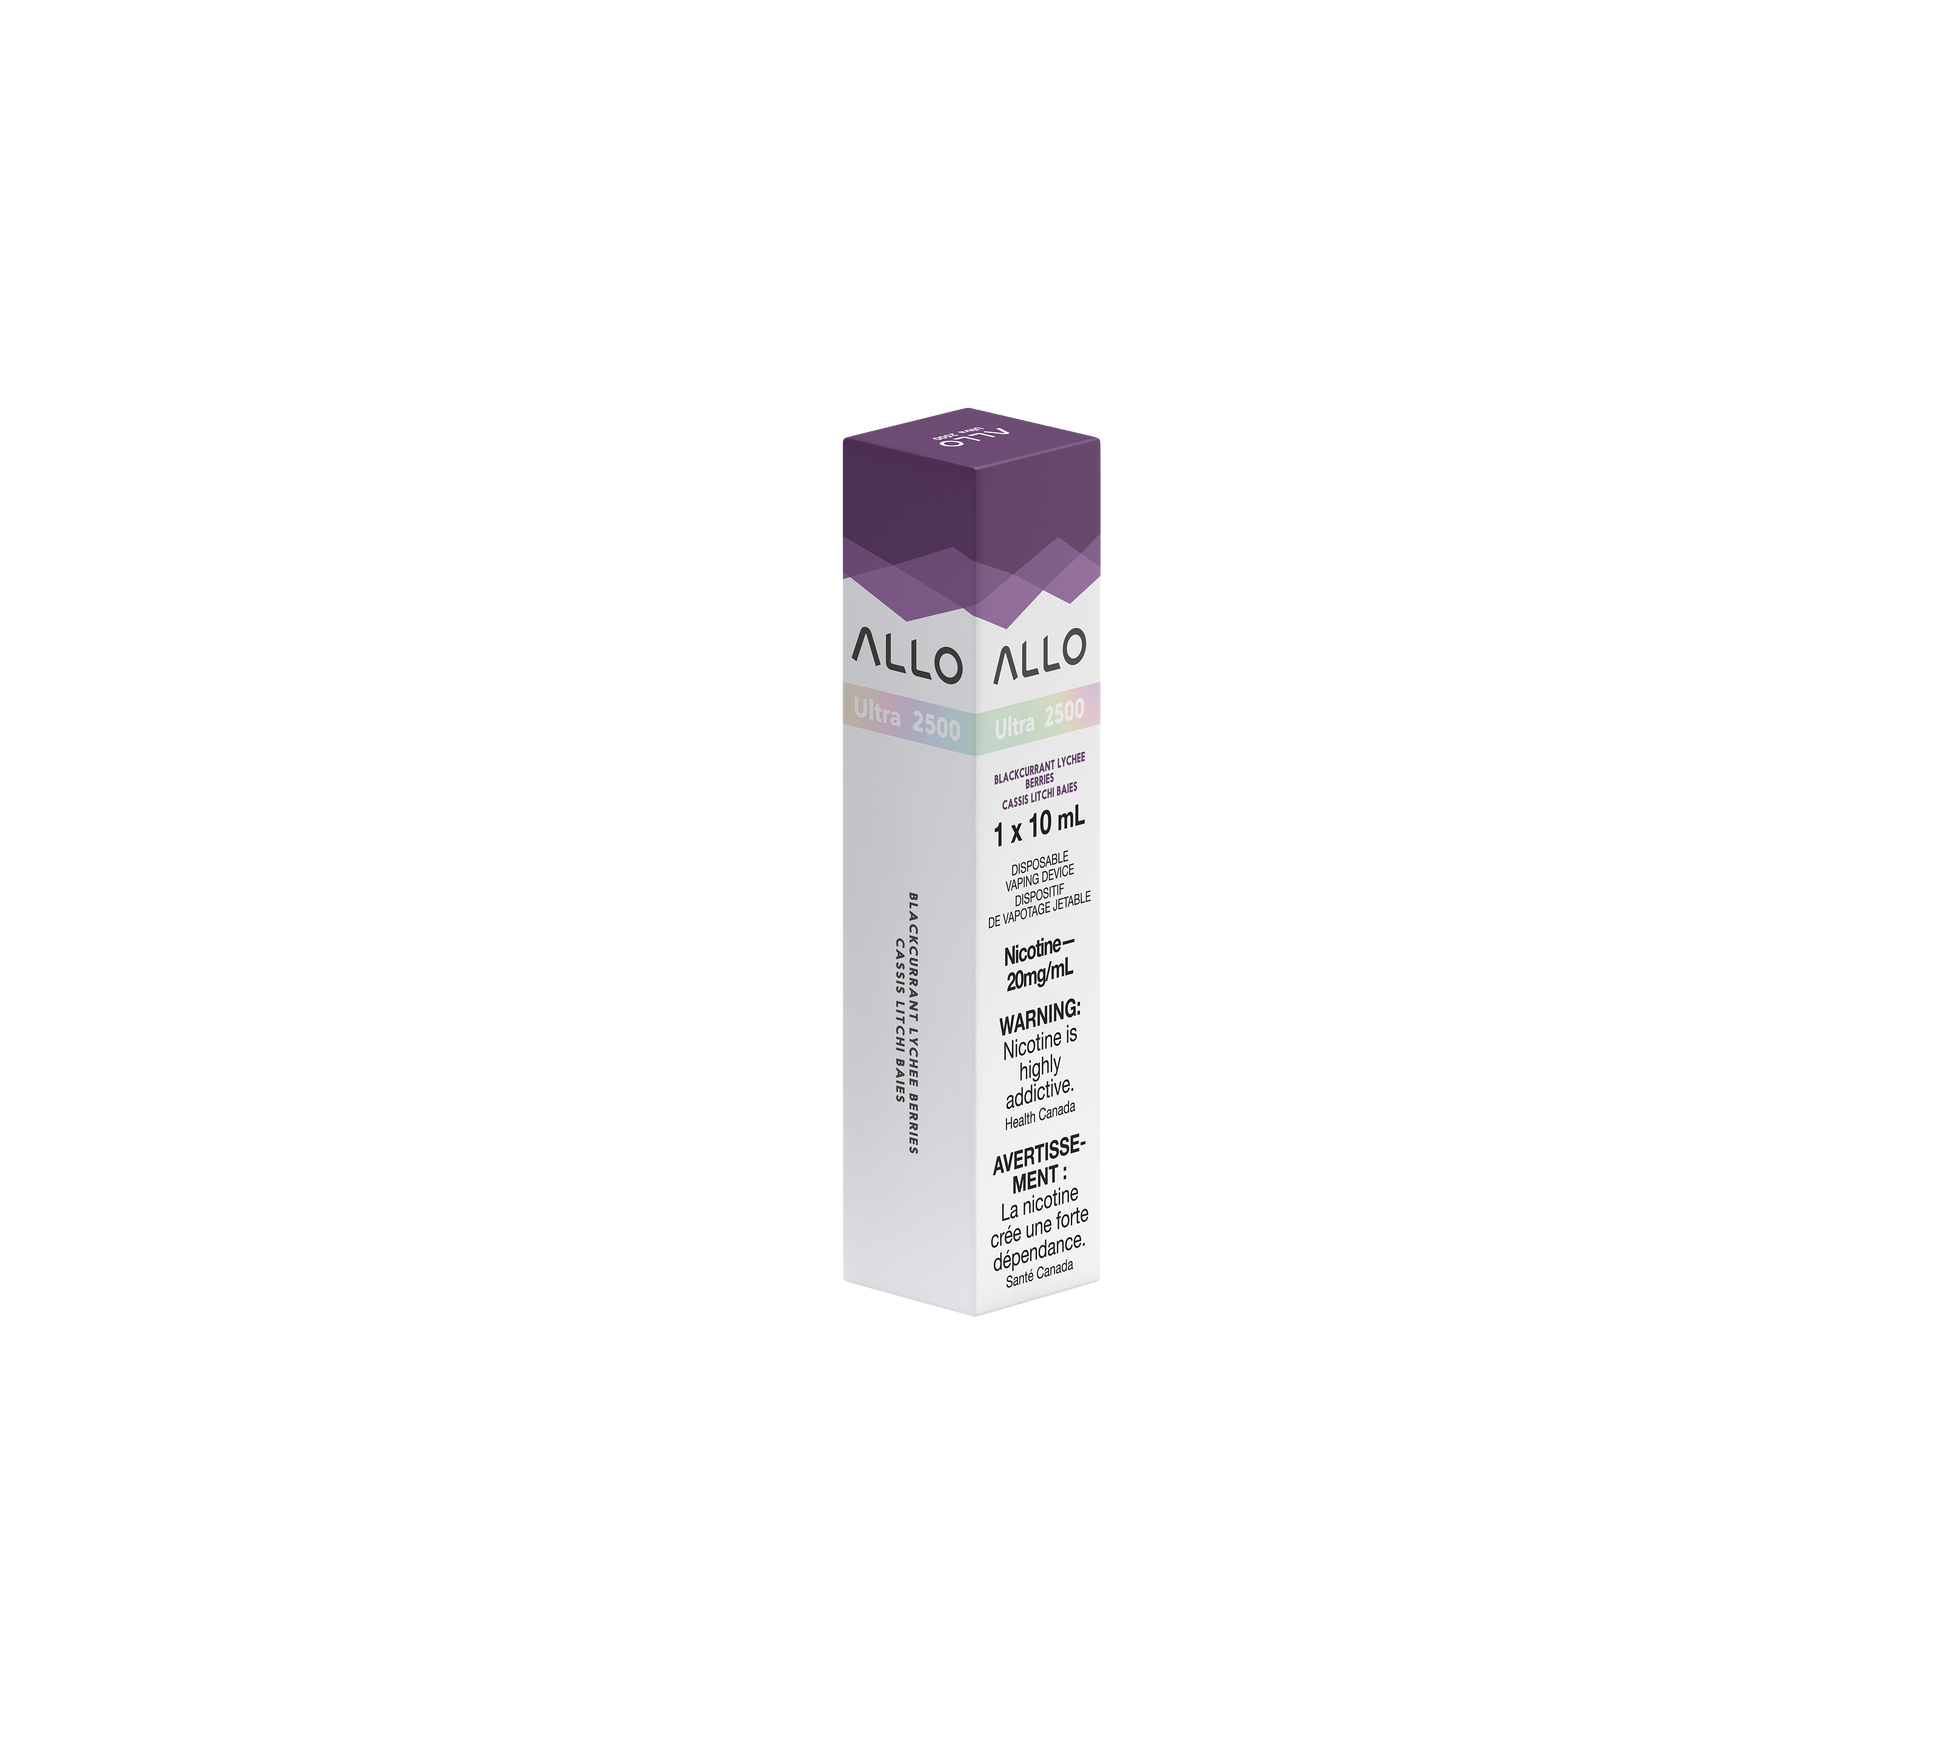 Allo Ultra 2500 Disposable Blackcurrant lychee berries